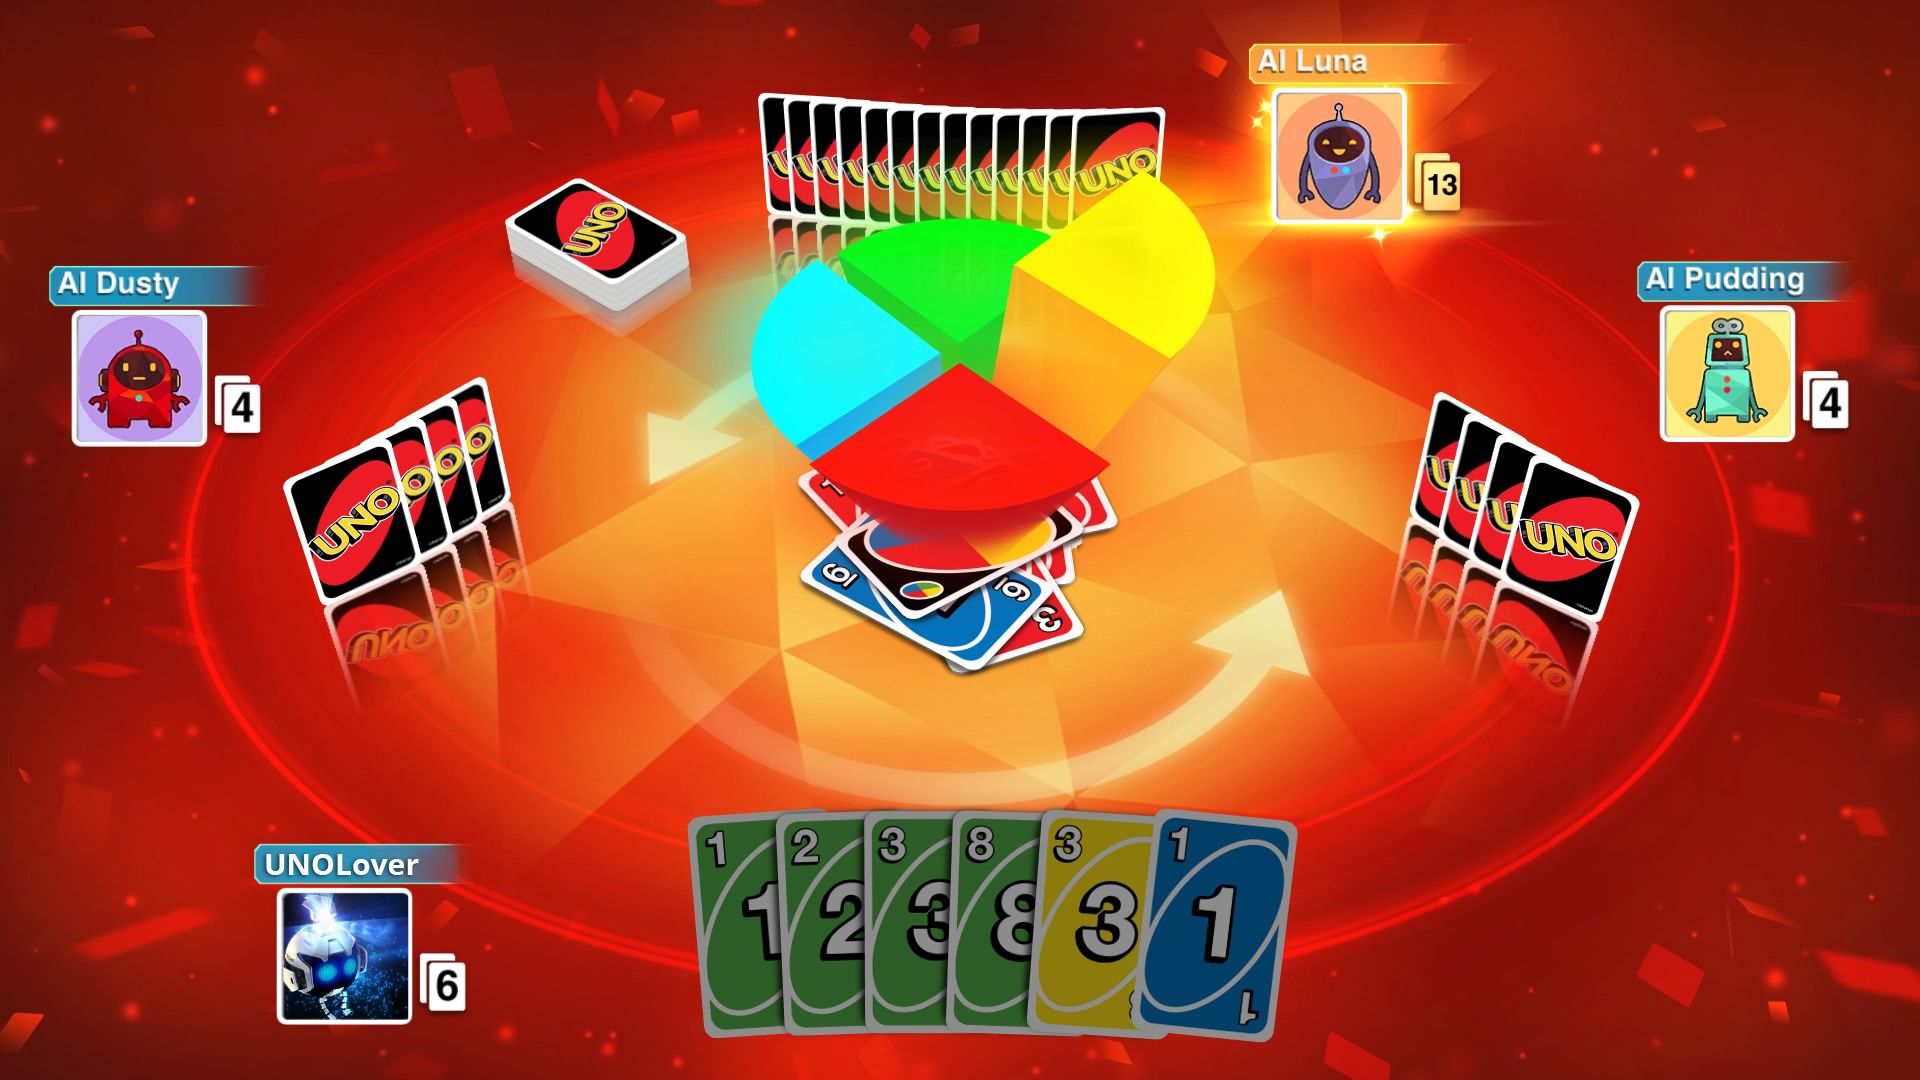 Buy cheap UNO cd key at the best pricegg.deals · In stock